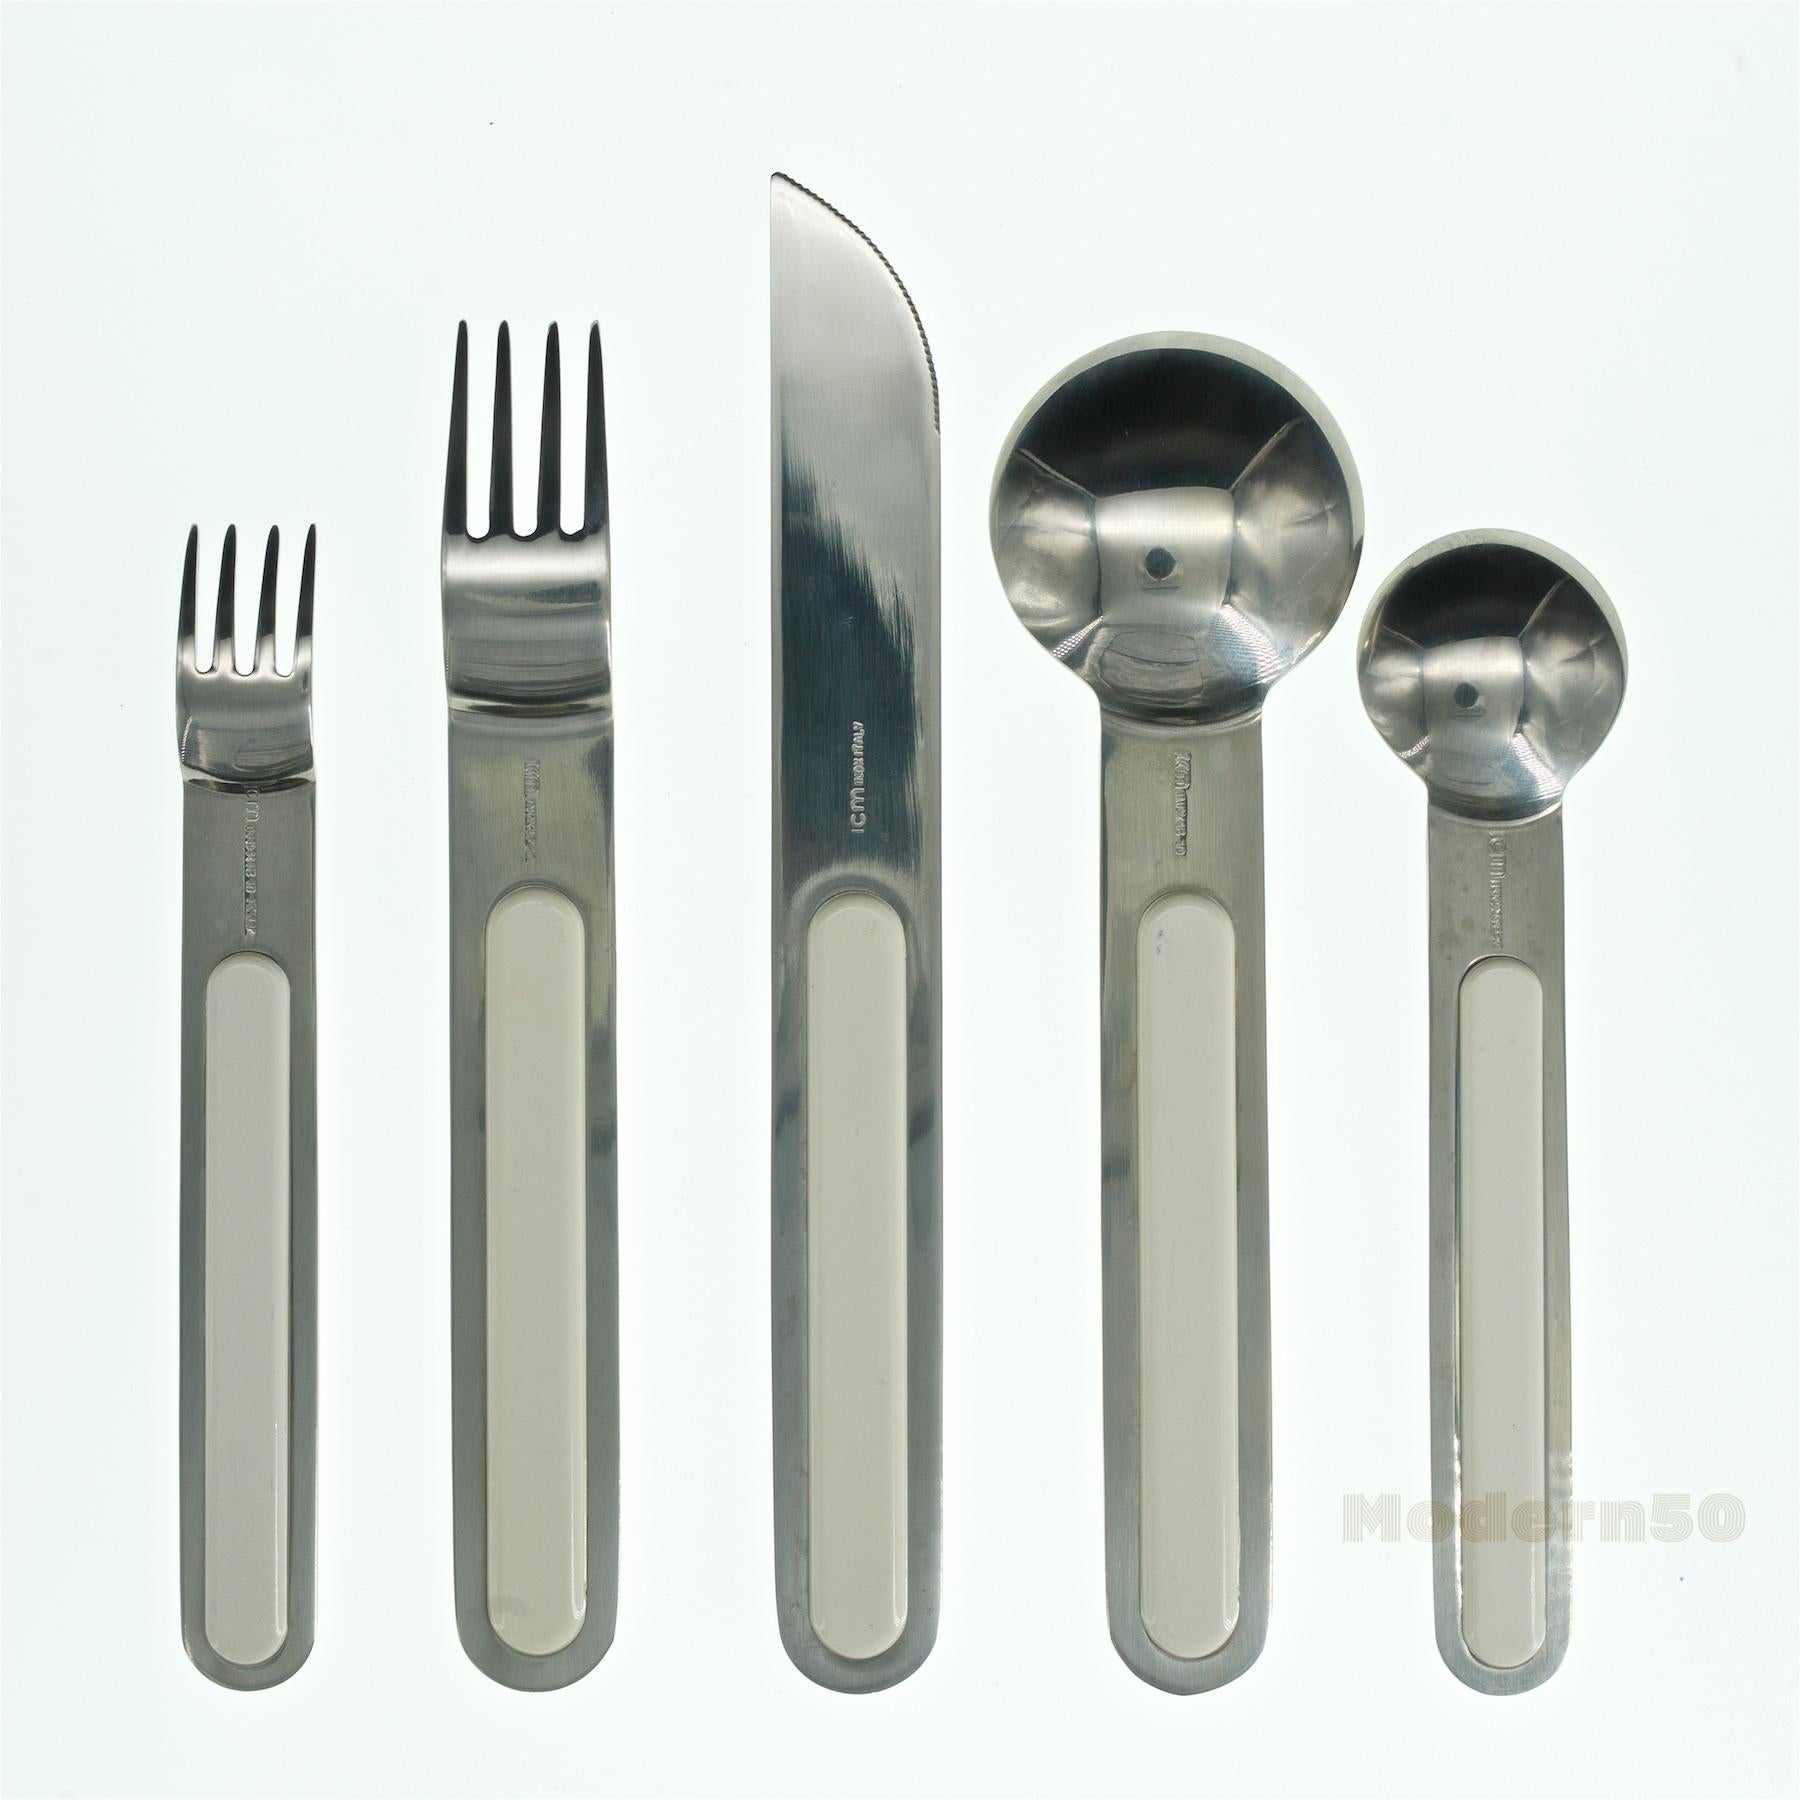 6 sets are available. One set includes; Dinner fork (7 in.,) Dessert/Salad fork (6 in.,) Soup/Table spoon (each measures (7 in.,) Teaspoon (6 in.,) and dinner knife (7.75 in.) 

Wonderful design, nice functionality. Designed by Sergio Asti in 1976